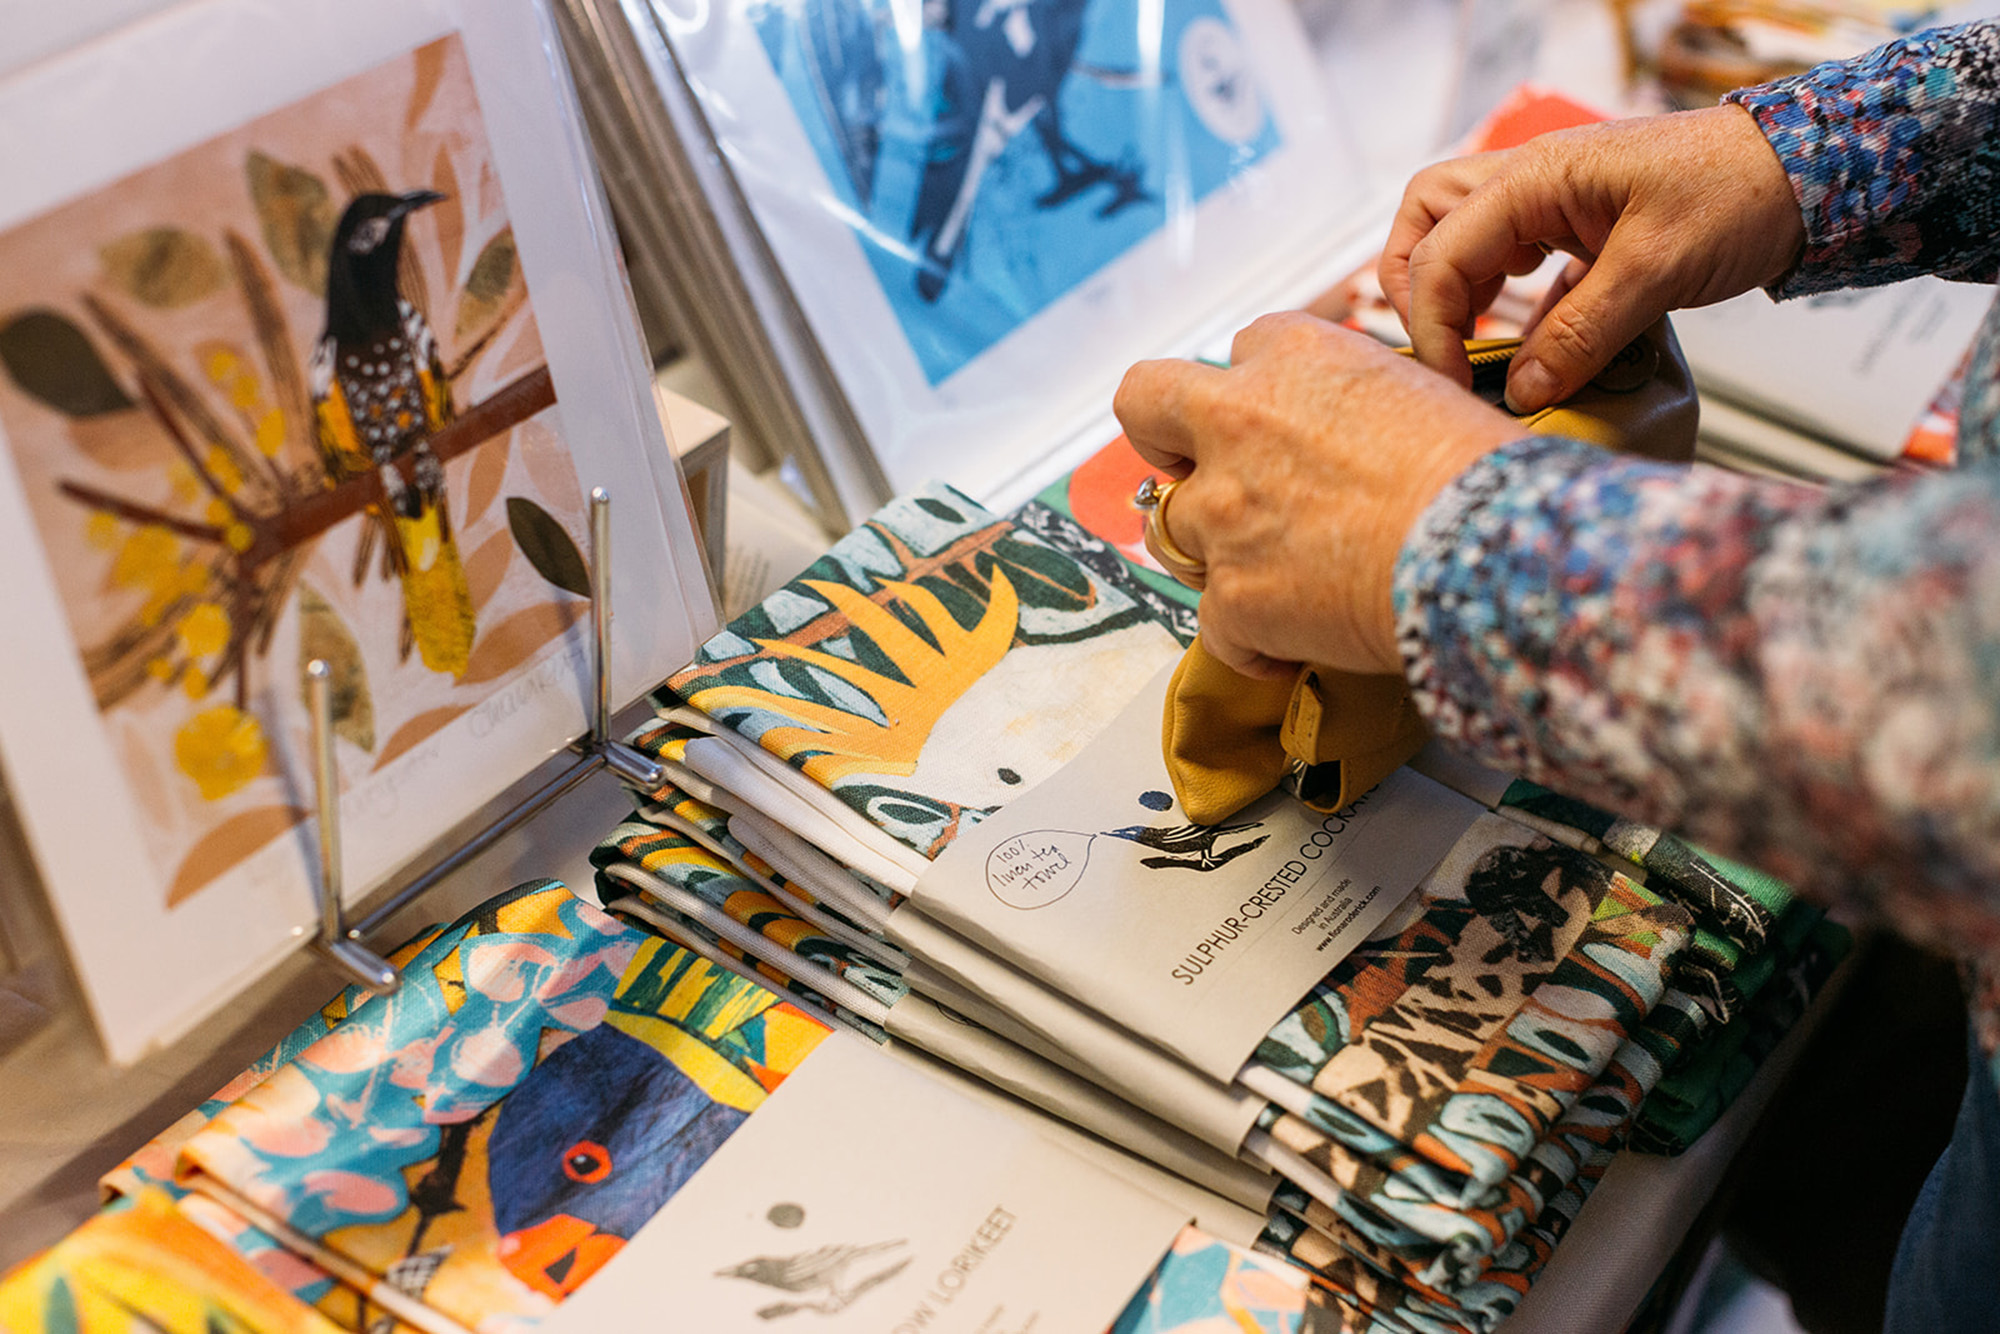 Two female hands looking through a selection of printed artworks and textiles at a market stall.